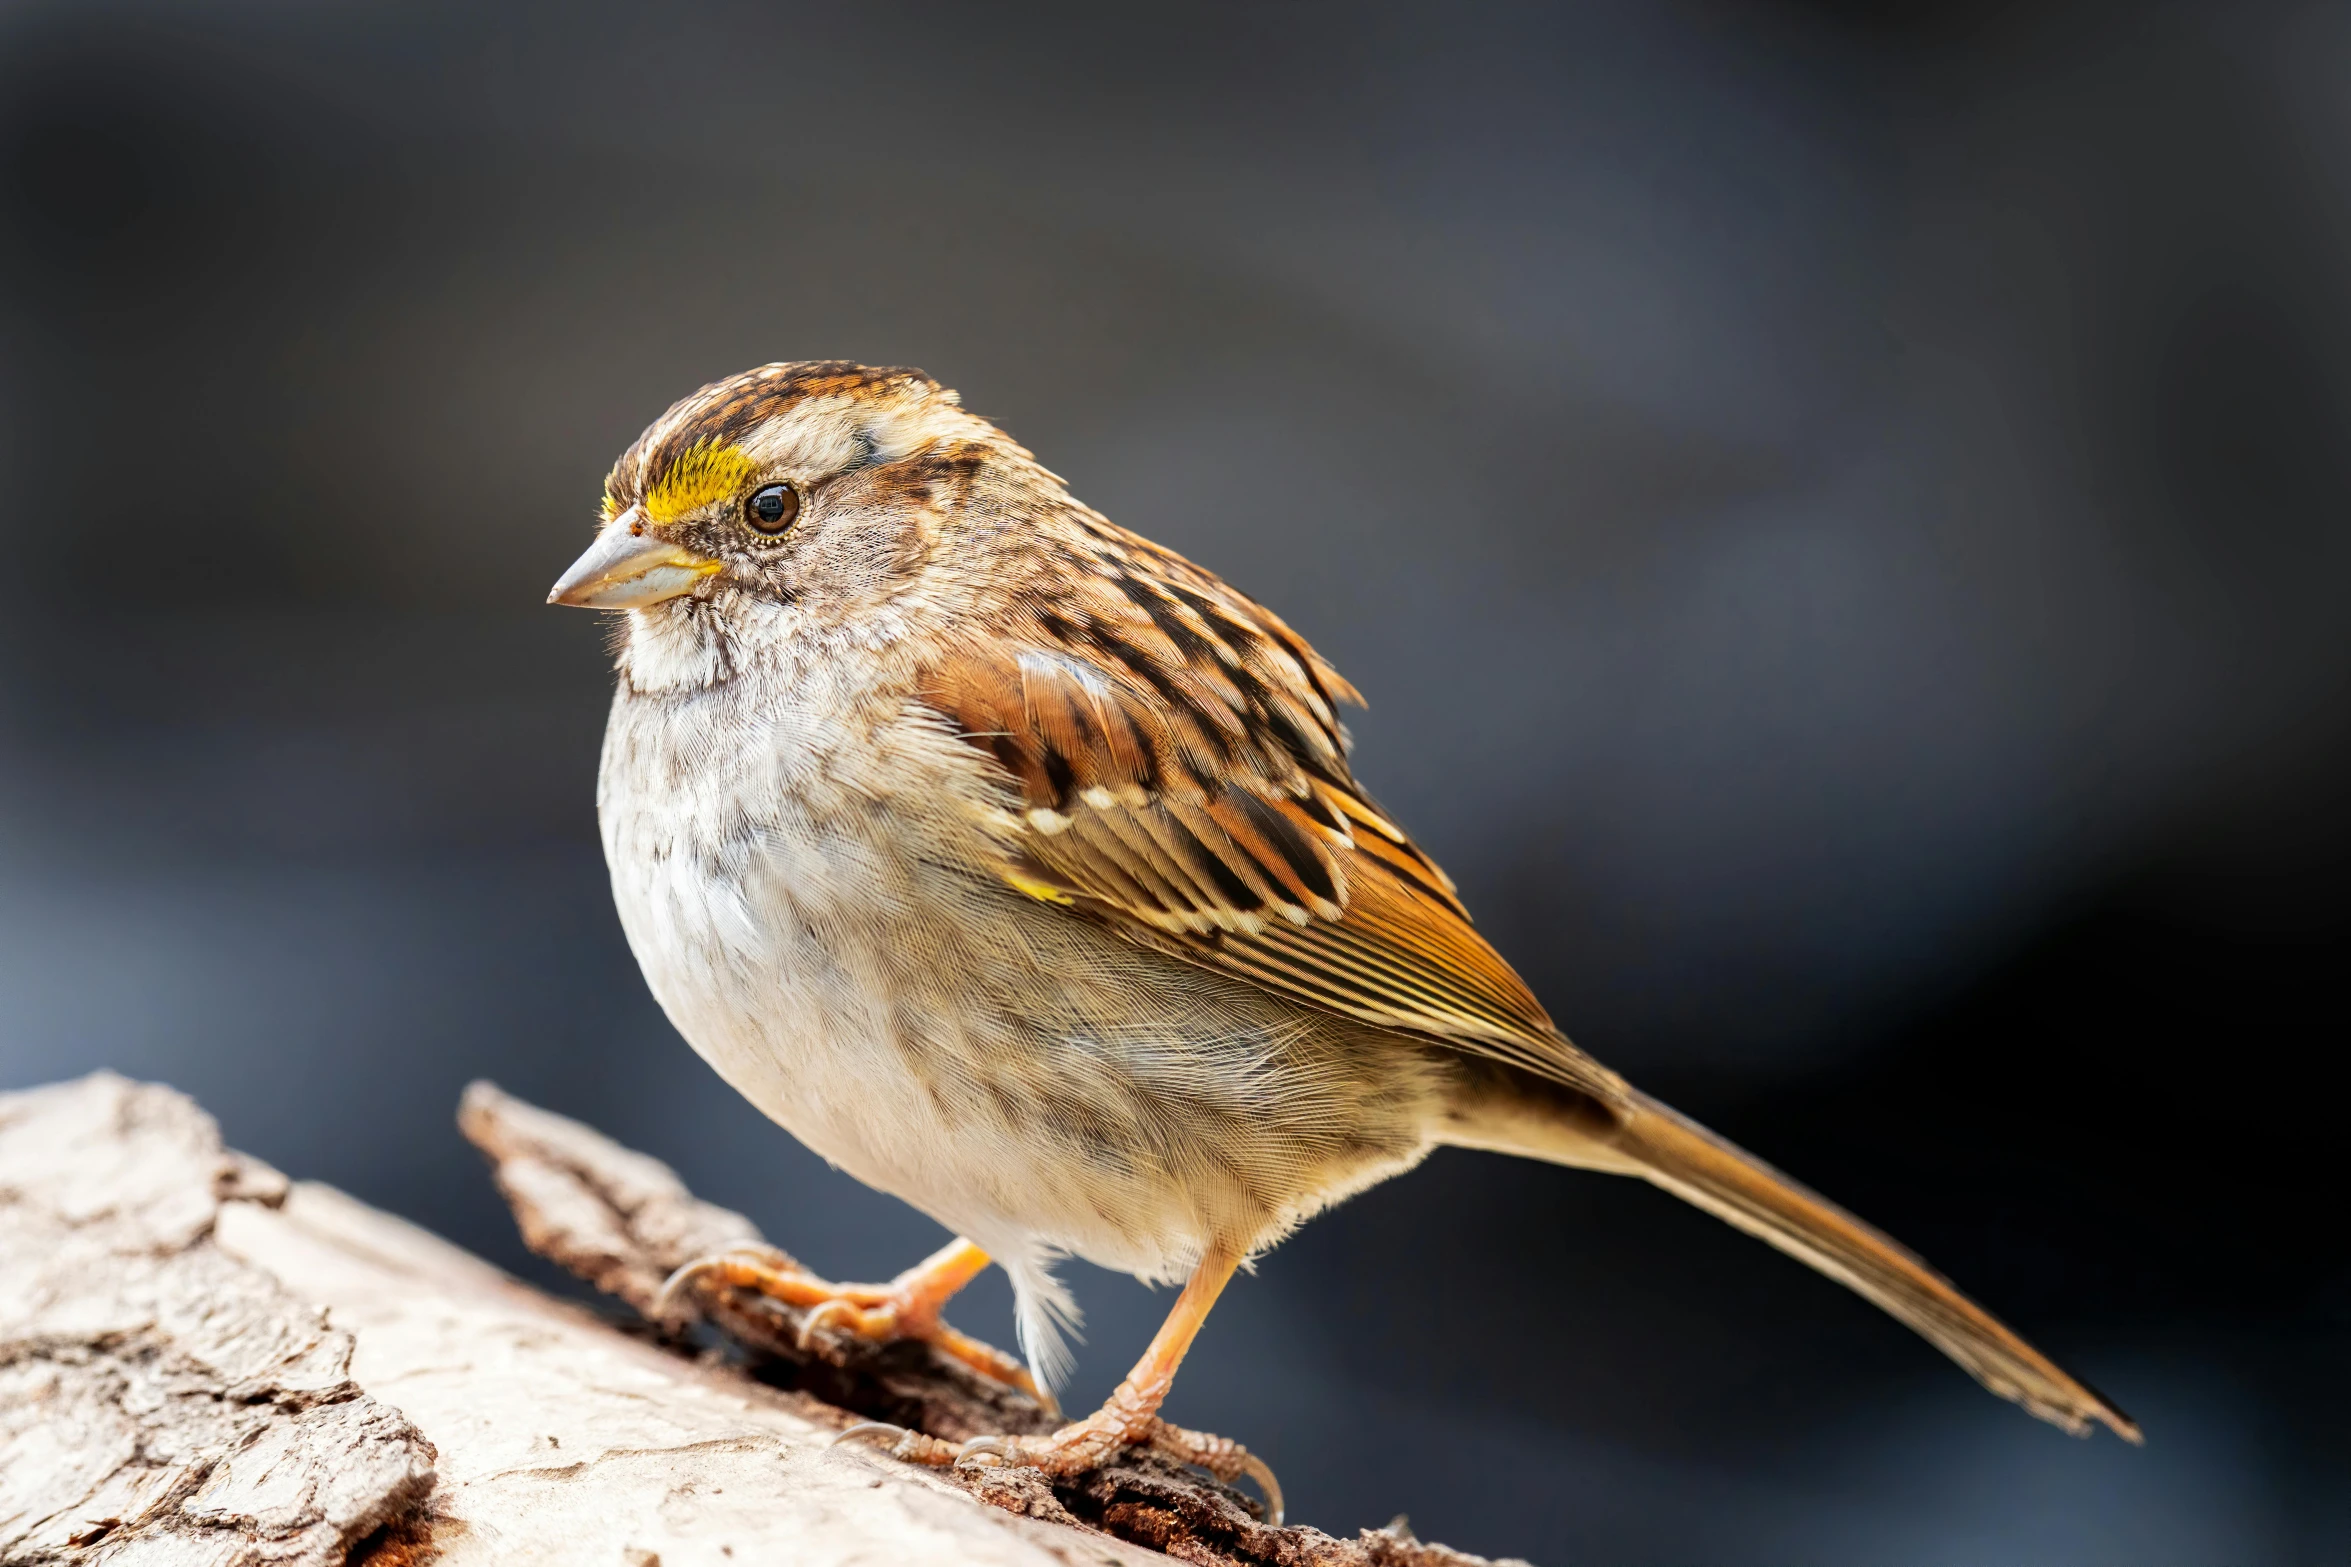 a small bird sitting on top of a tree branch, a portrait, by John Gibson, pexels contest winner, sparrows, mid 2 0's female, old male, full body close-up shot